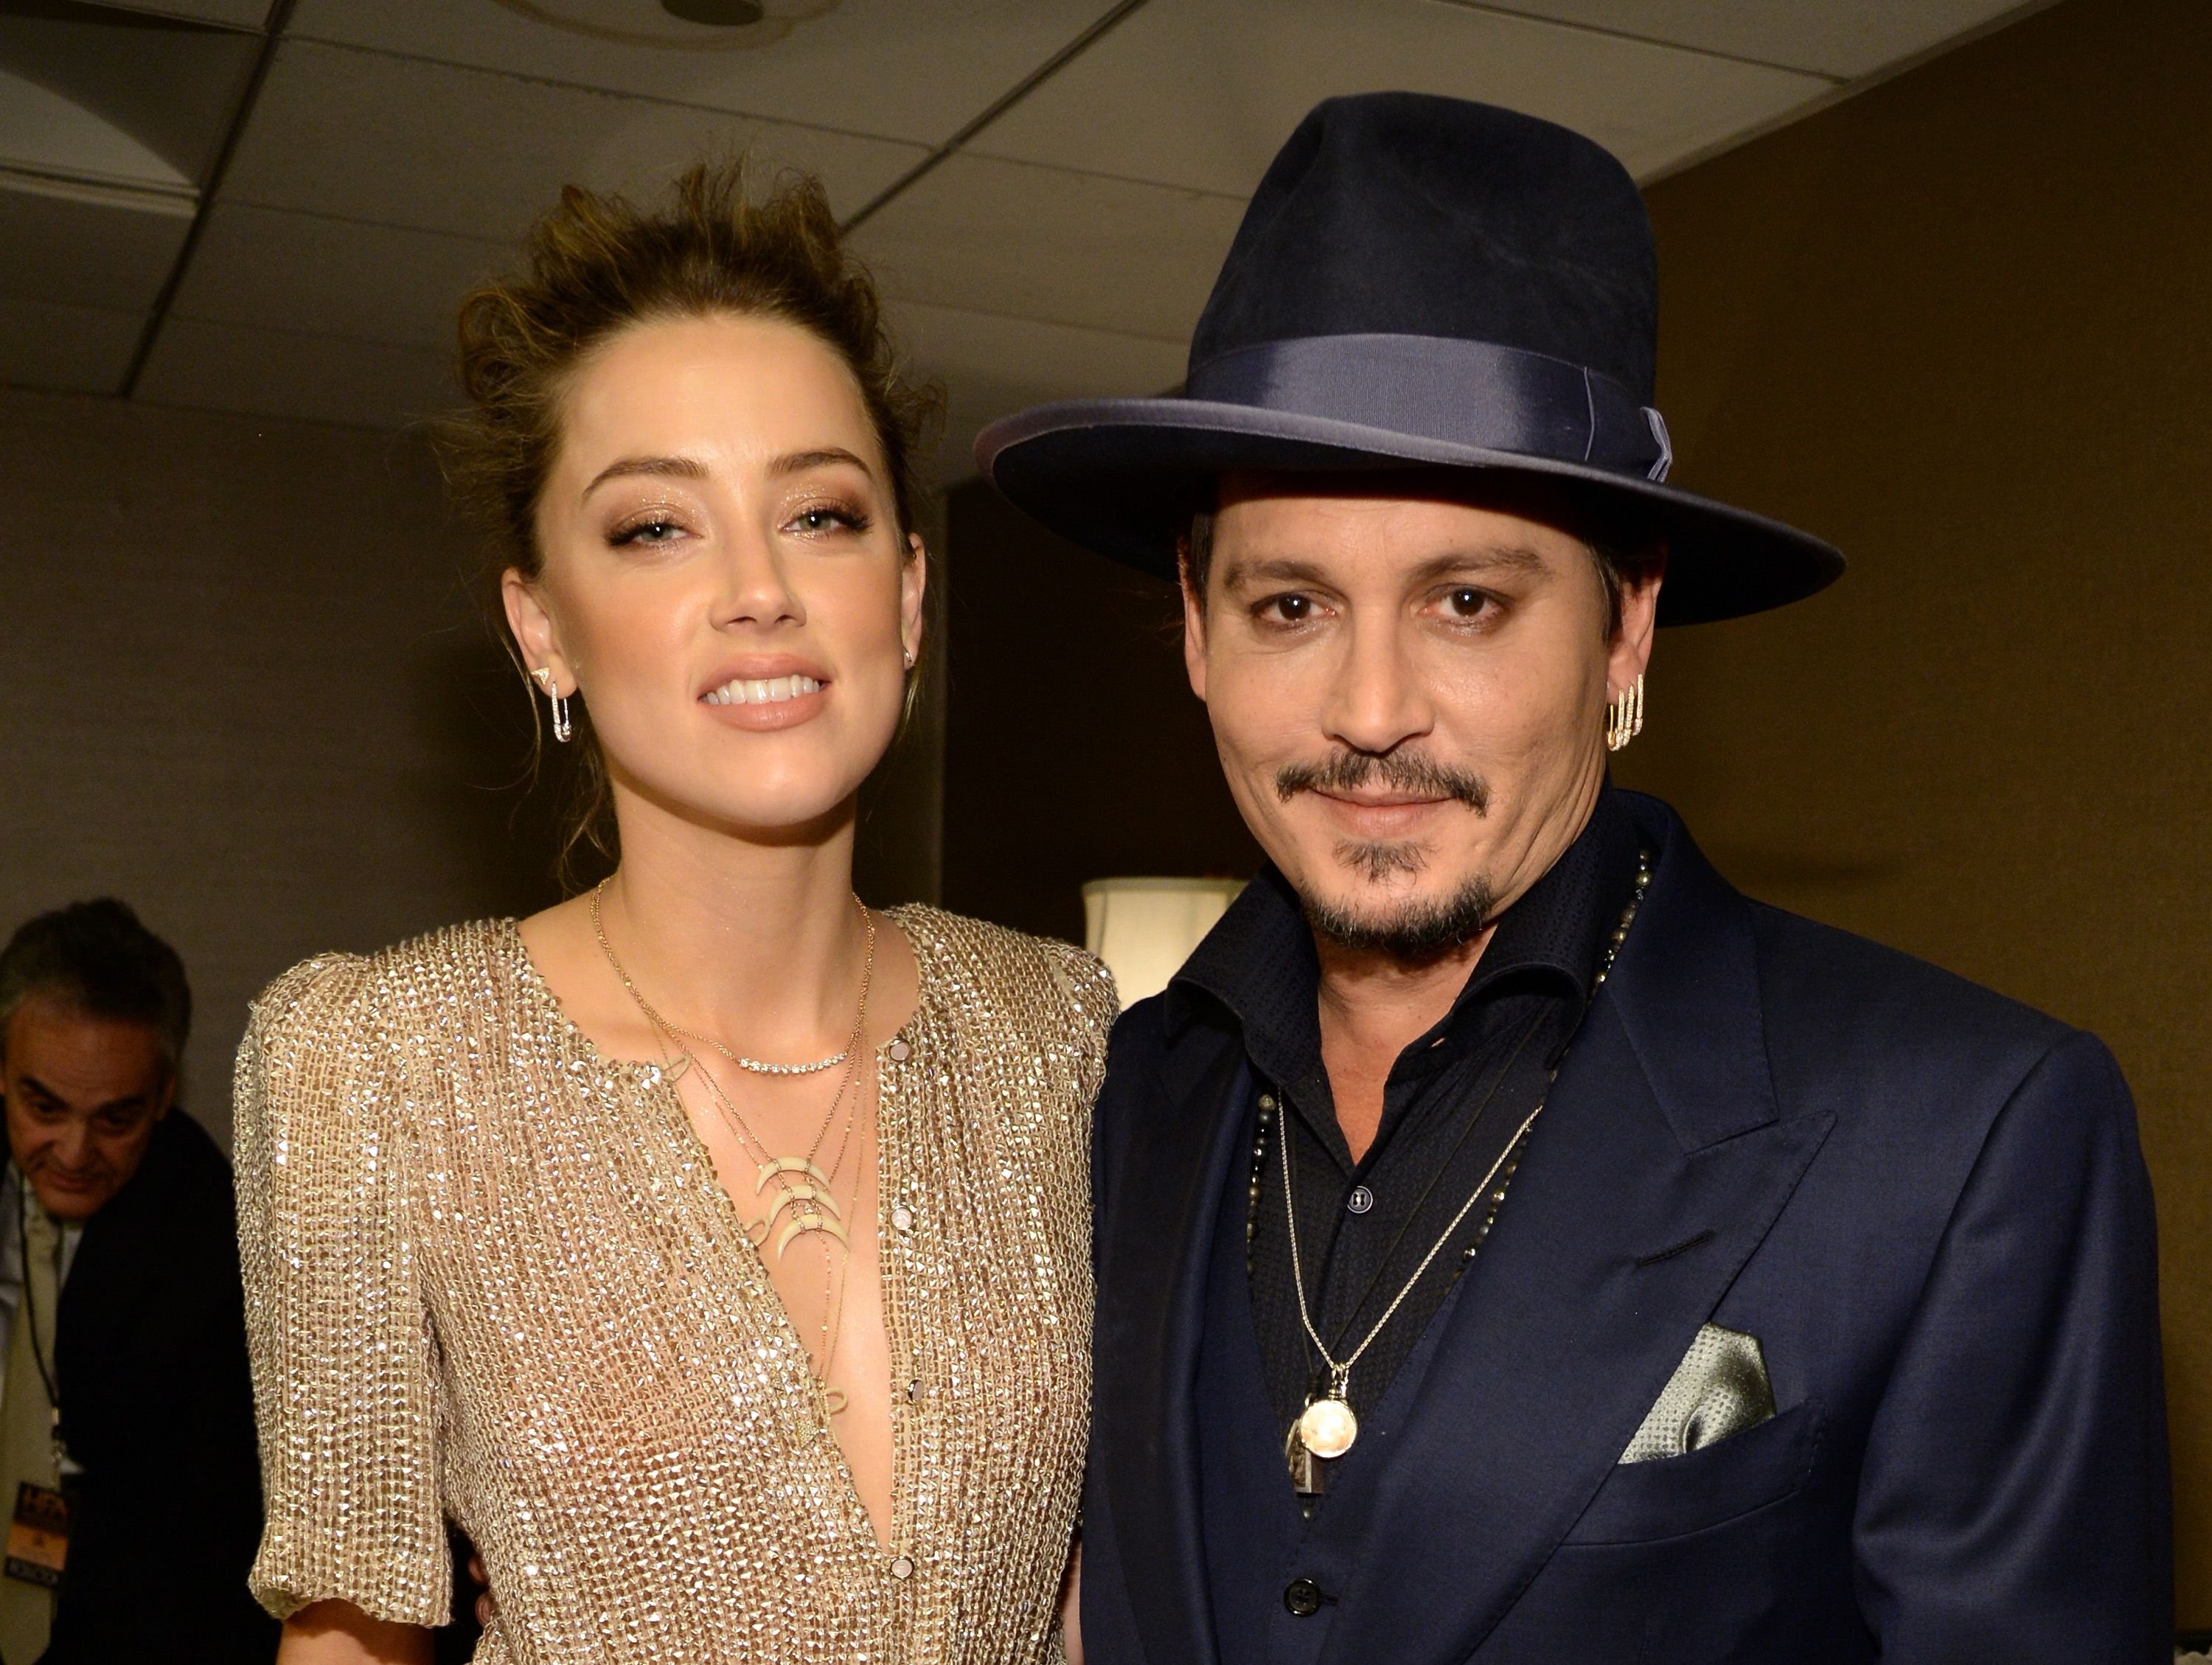 Amber Heard and Johnny Depp during the 19th Annual Hollywood Film Awards at The Beverly Hilton Hotel on November 1, 2015, in Beverly Hills, California. | Source: Getty Images